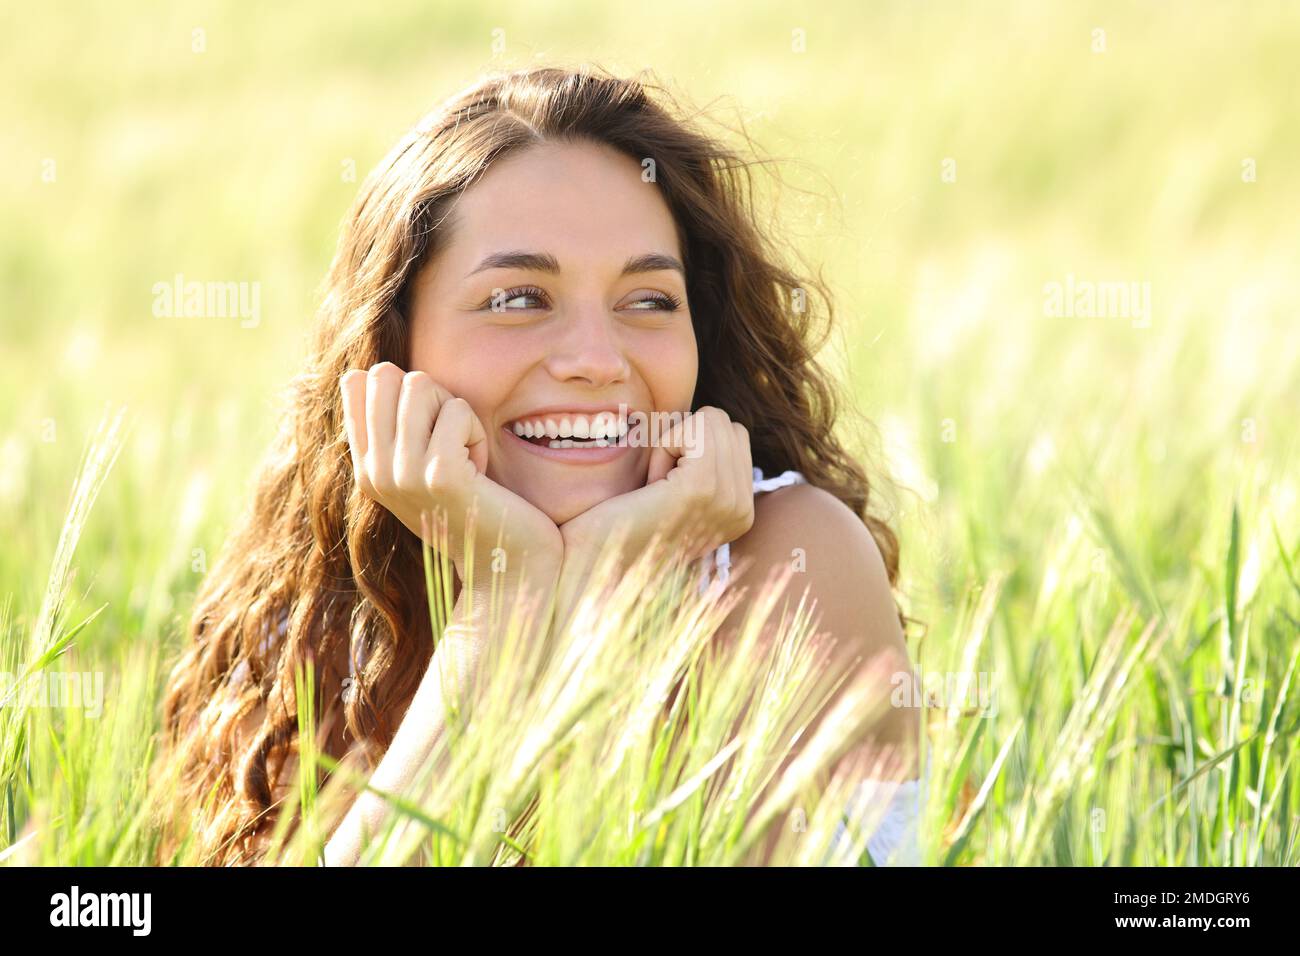 Candid happy woman smiling in a wheat field Stock Photo